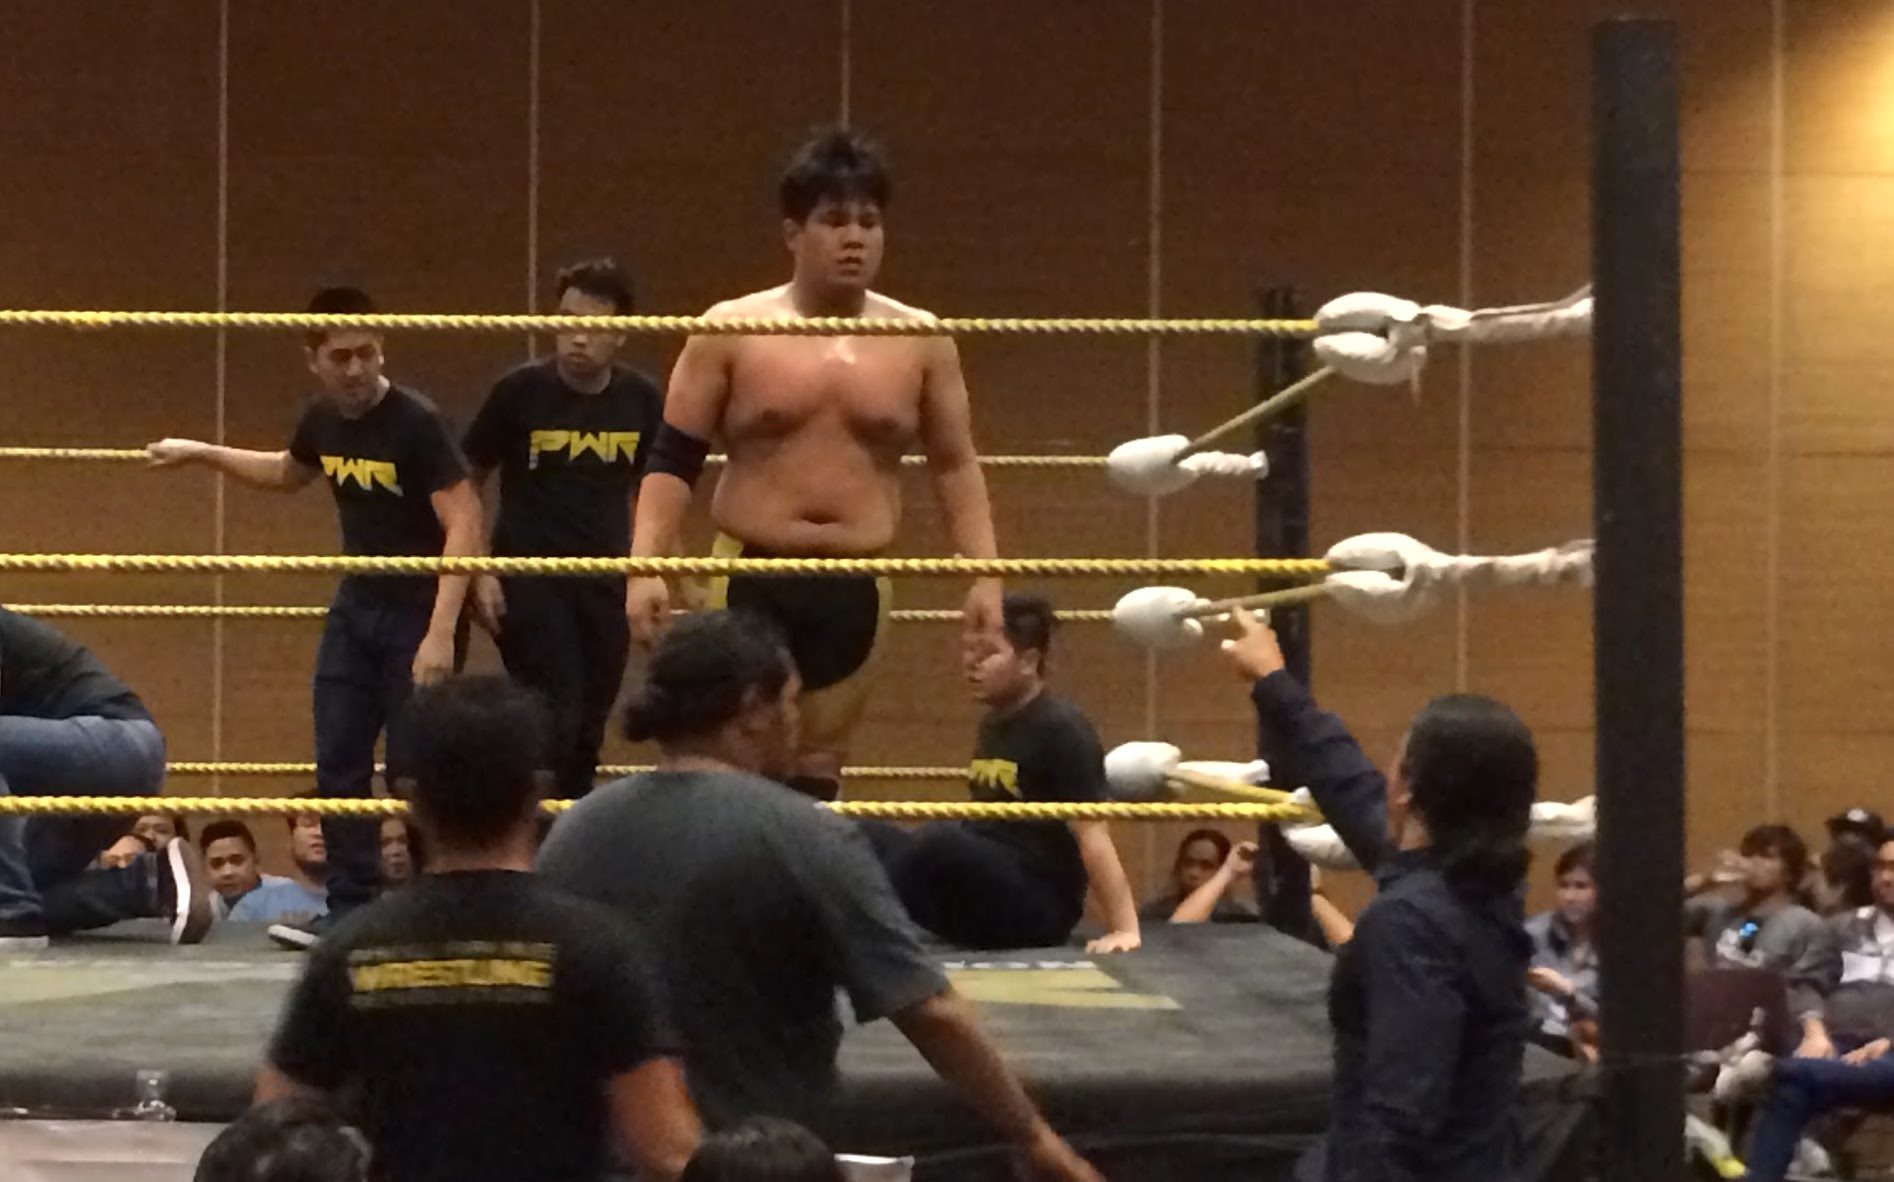 ‘PWR Live: Mainit’ results, highlights